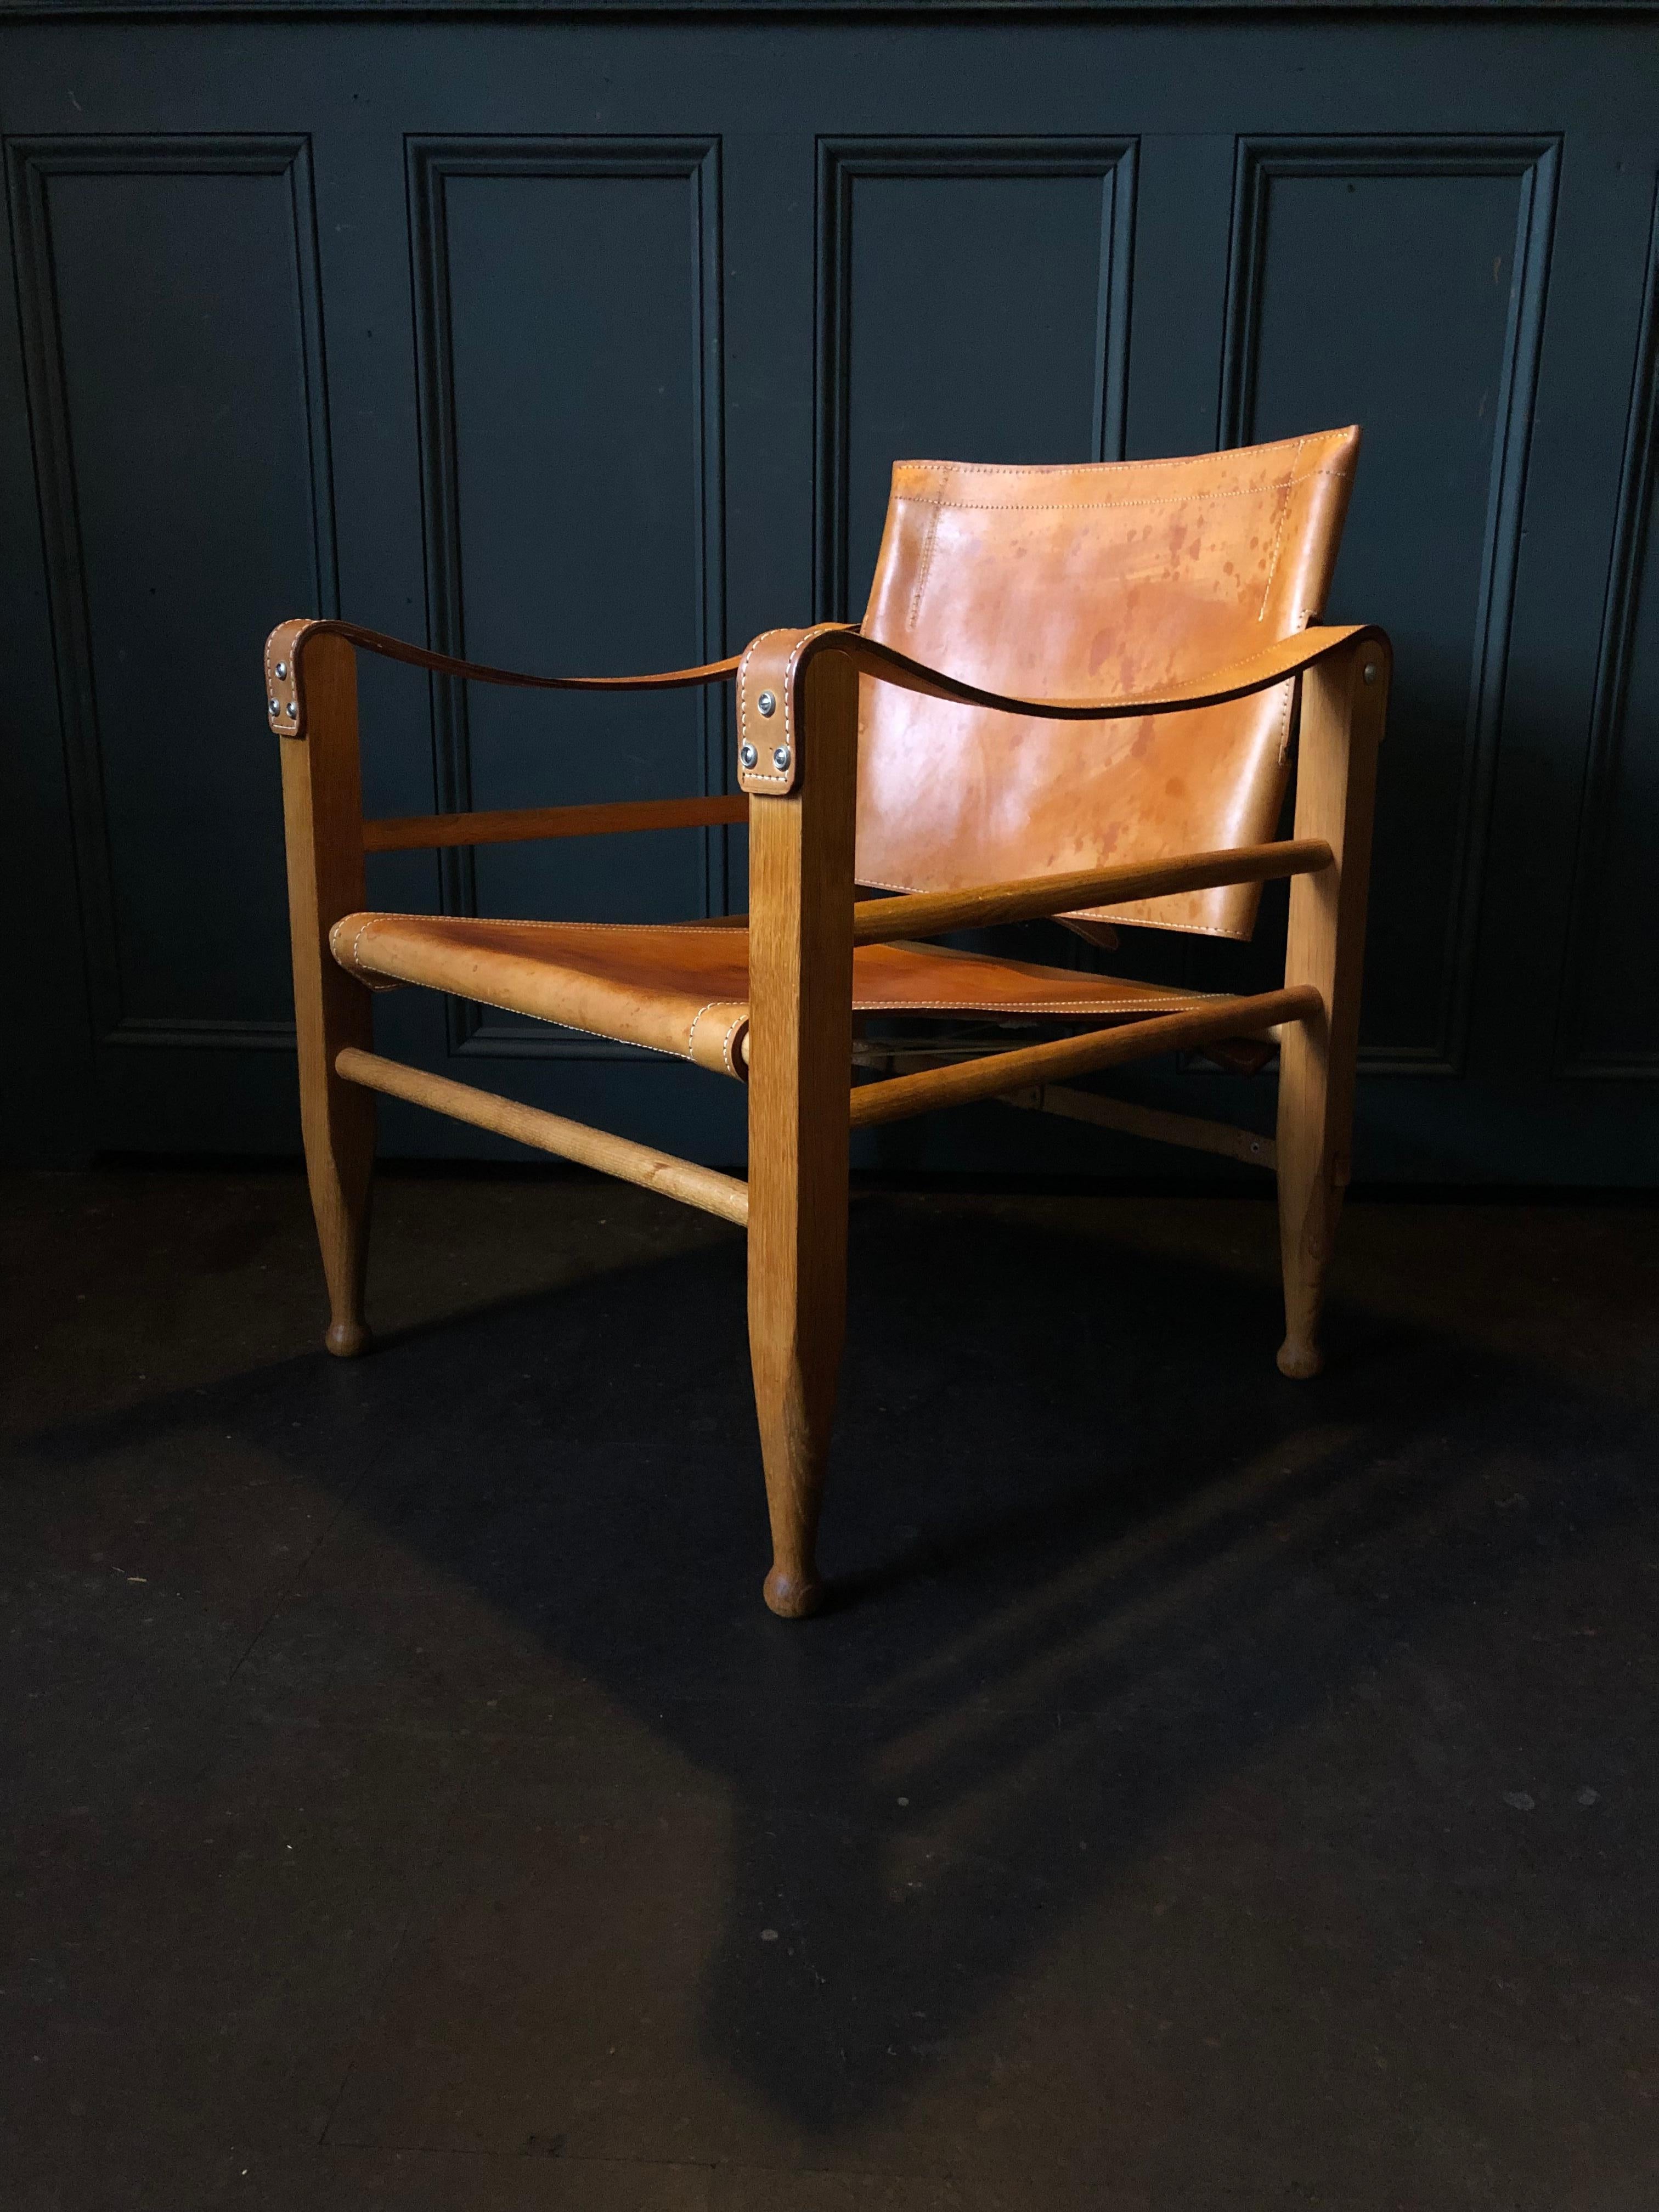 20th Century Pair of Safari Chairs and Table, Aage Bruun & Son, Børge Mogensen